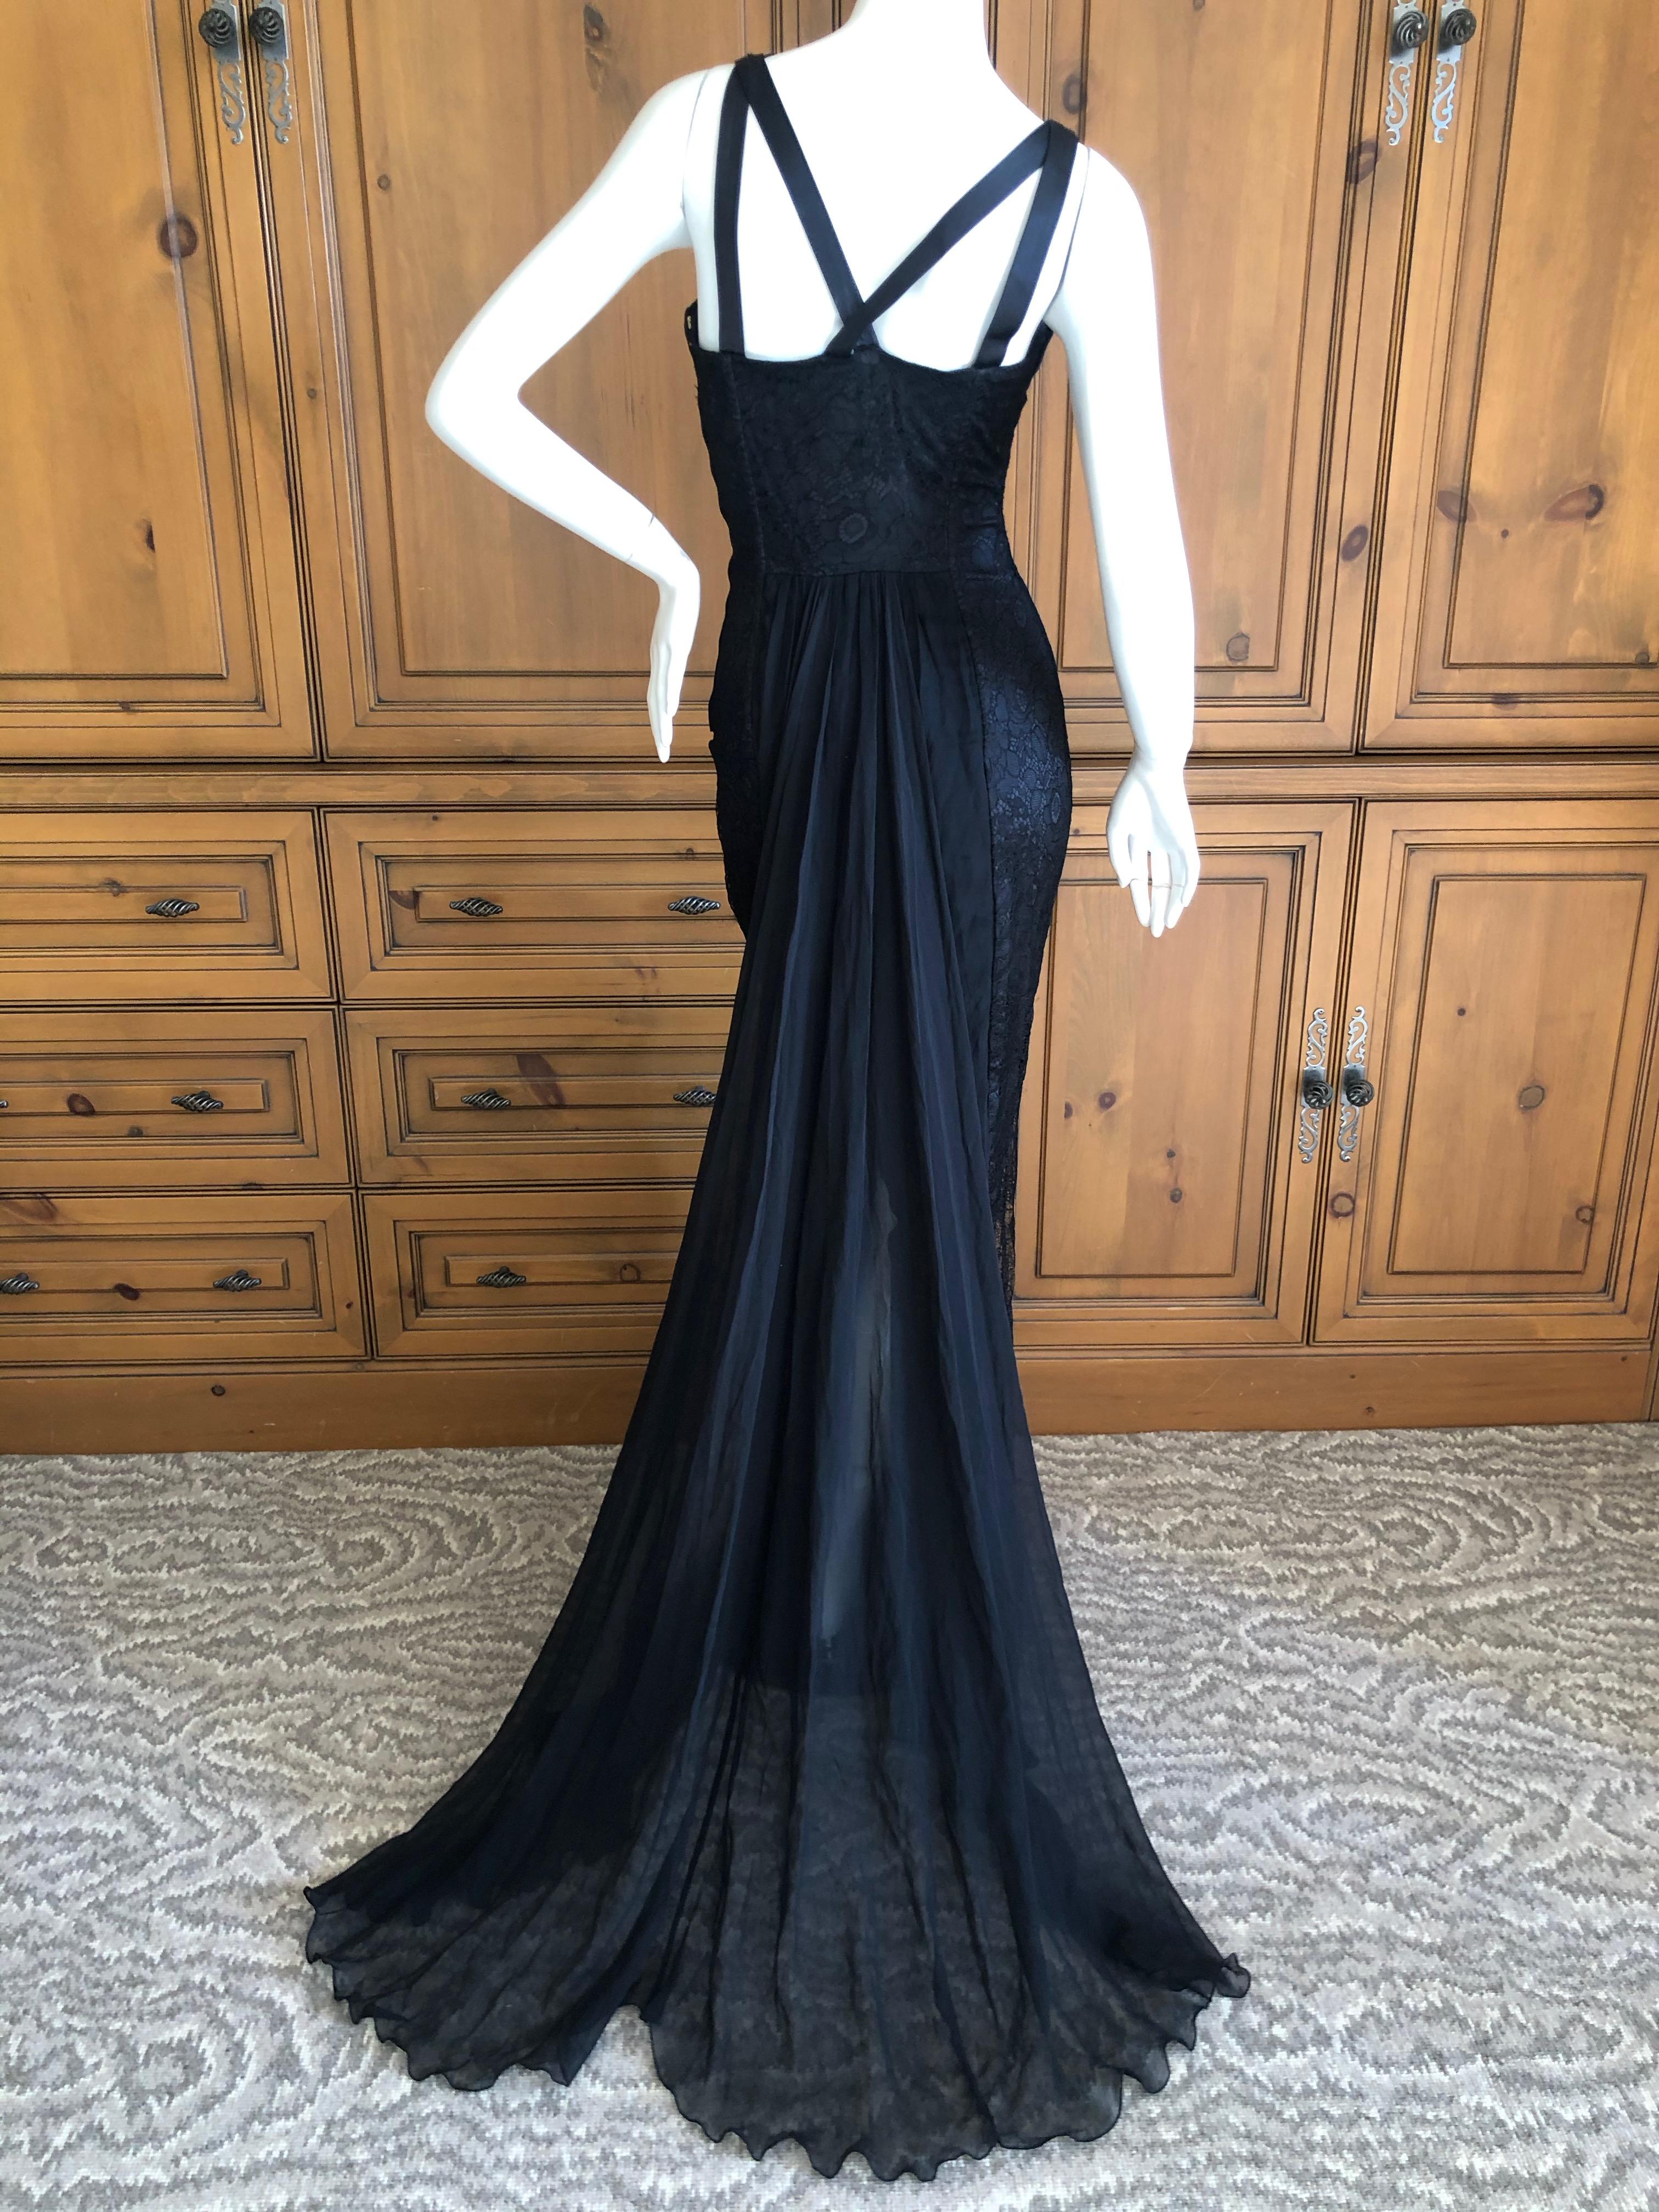 Dolce & Gabbana Vintage Black Lace Corset Evening Gown with Train For Sale 2